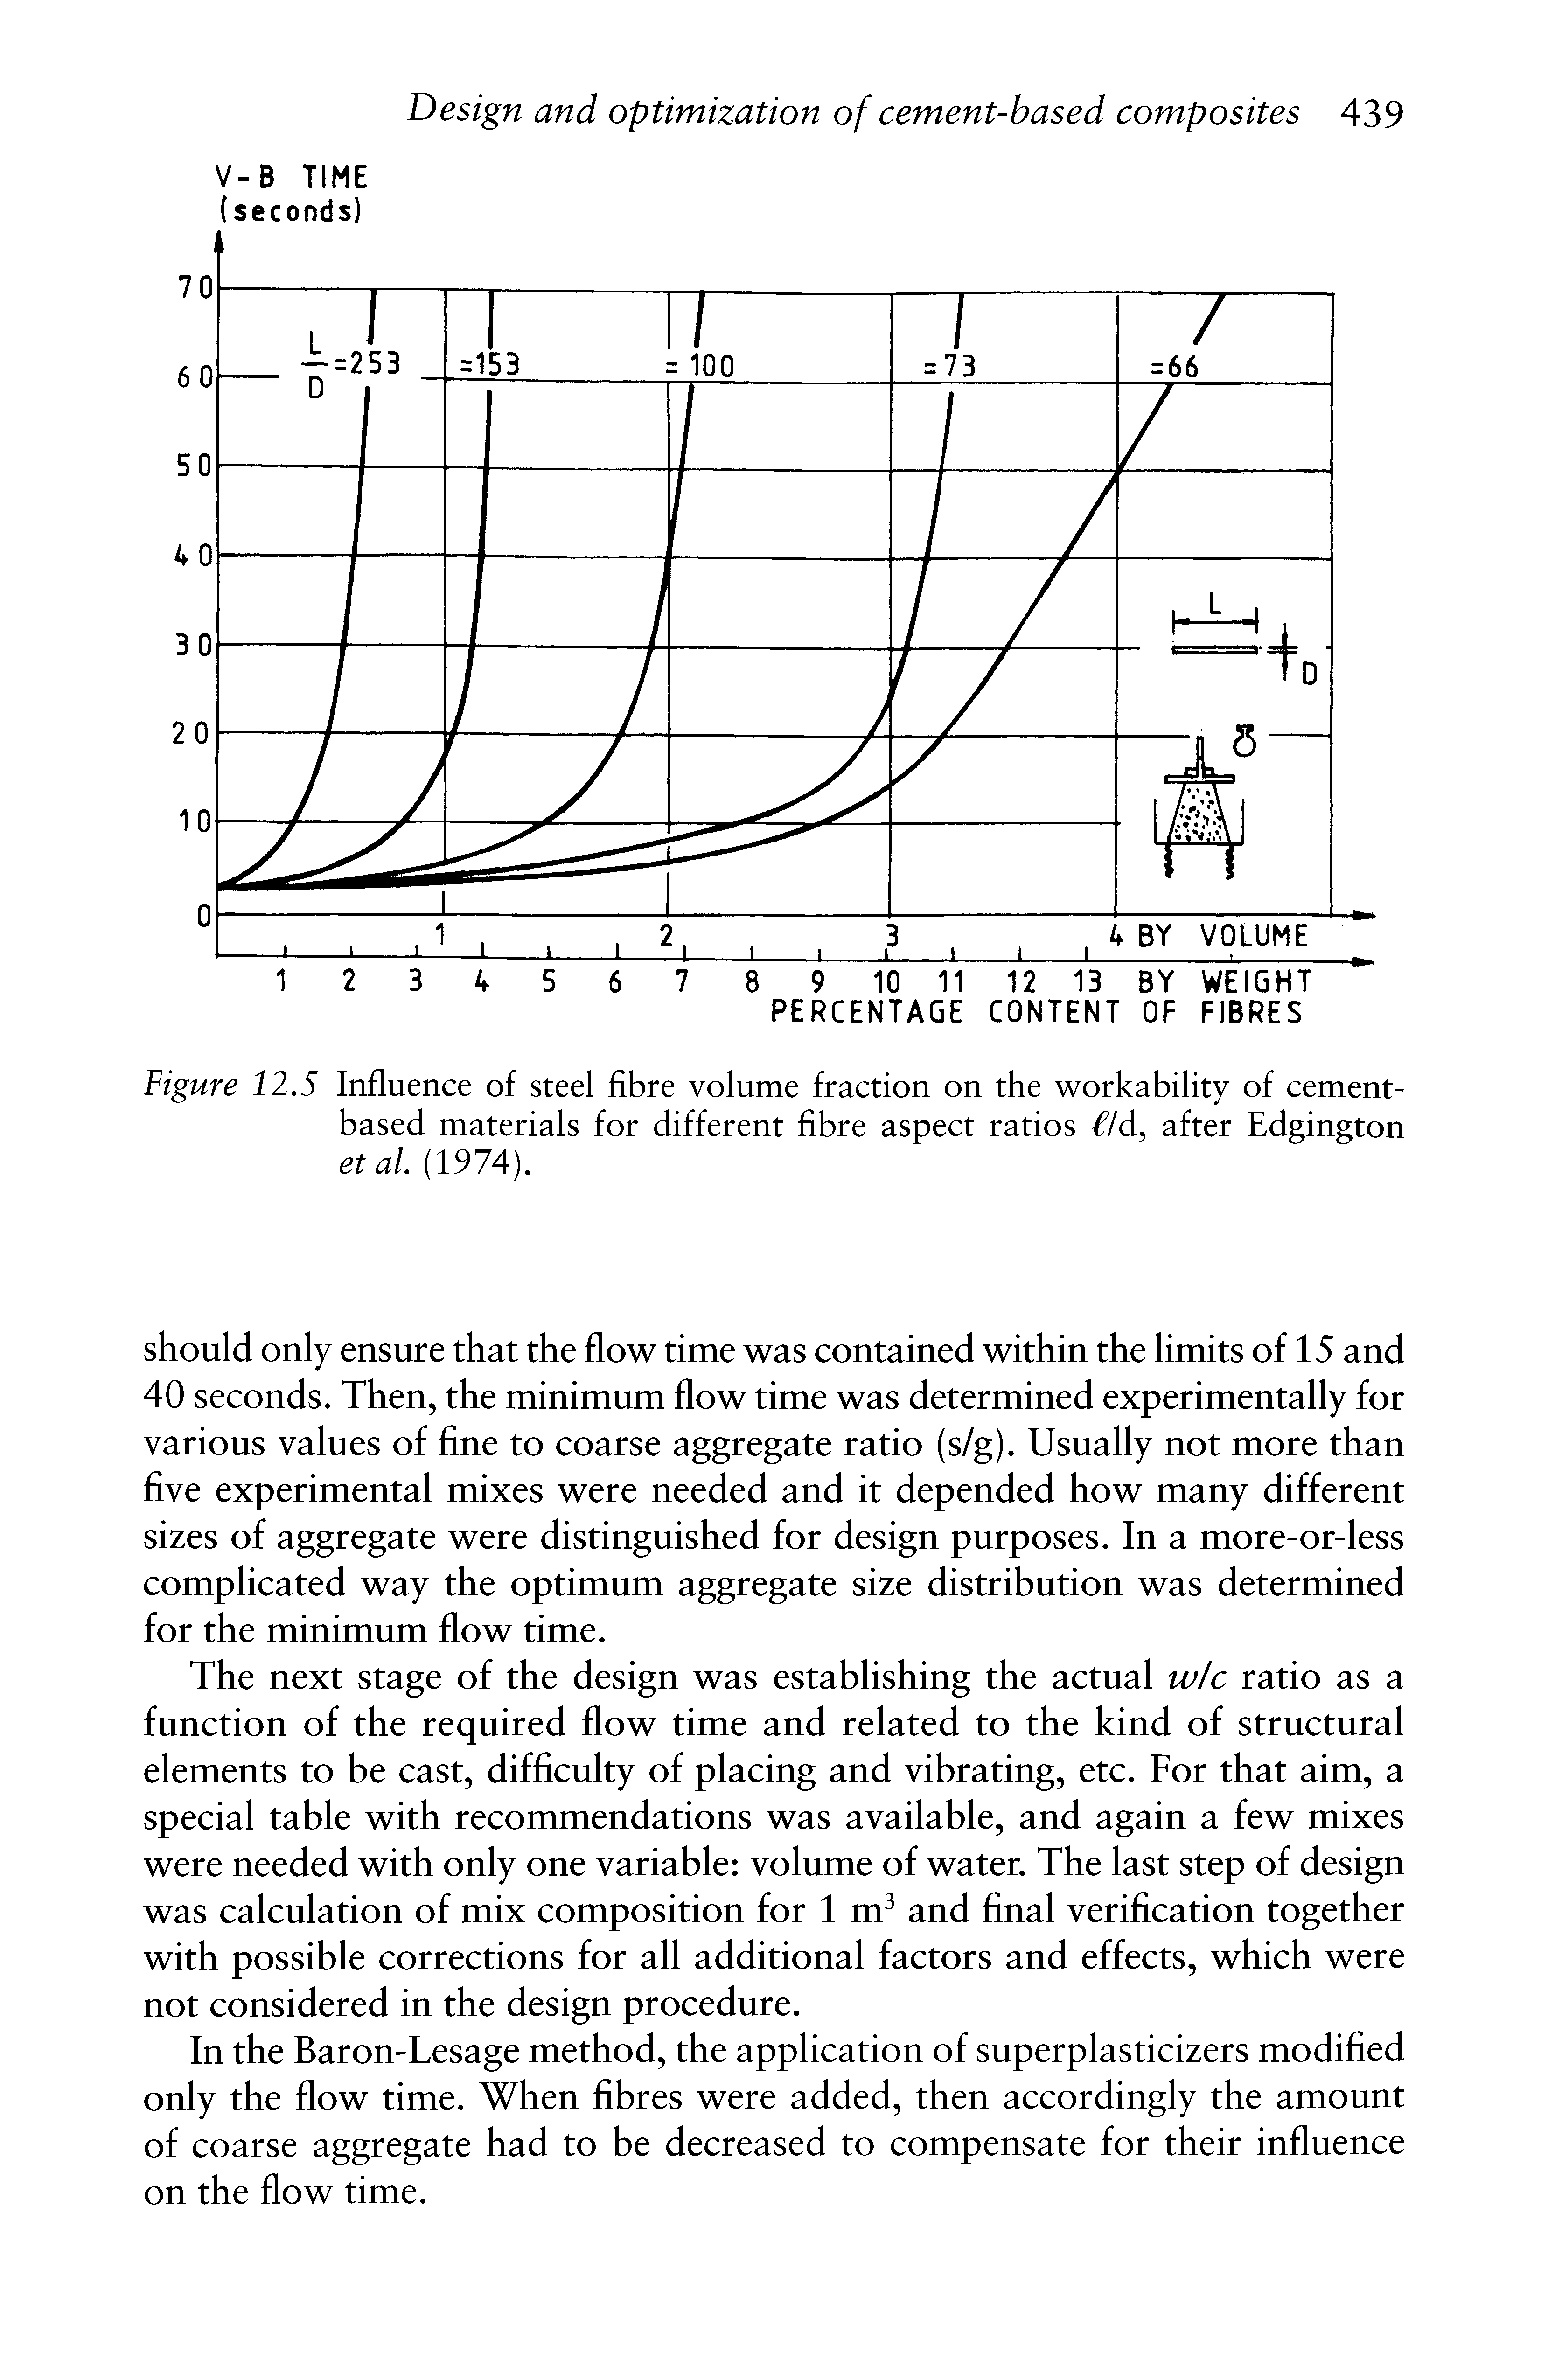 Figure 12.5 Influence of steel fibre volume fraction on the workability of cement-based materials for different fibre aspect ratios /d, after Edgington etal (1974).